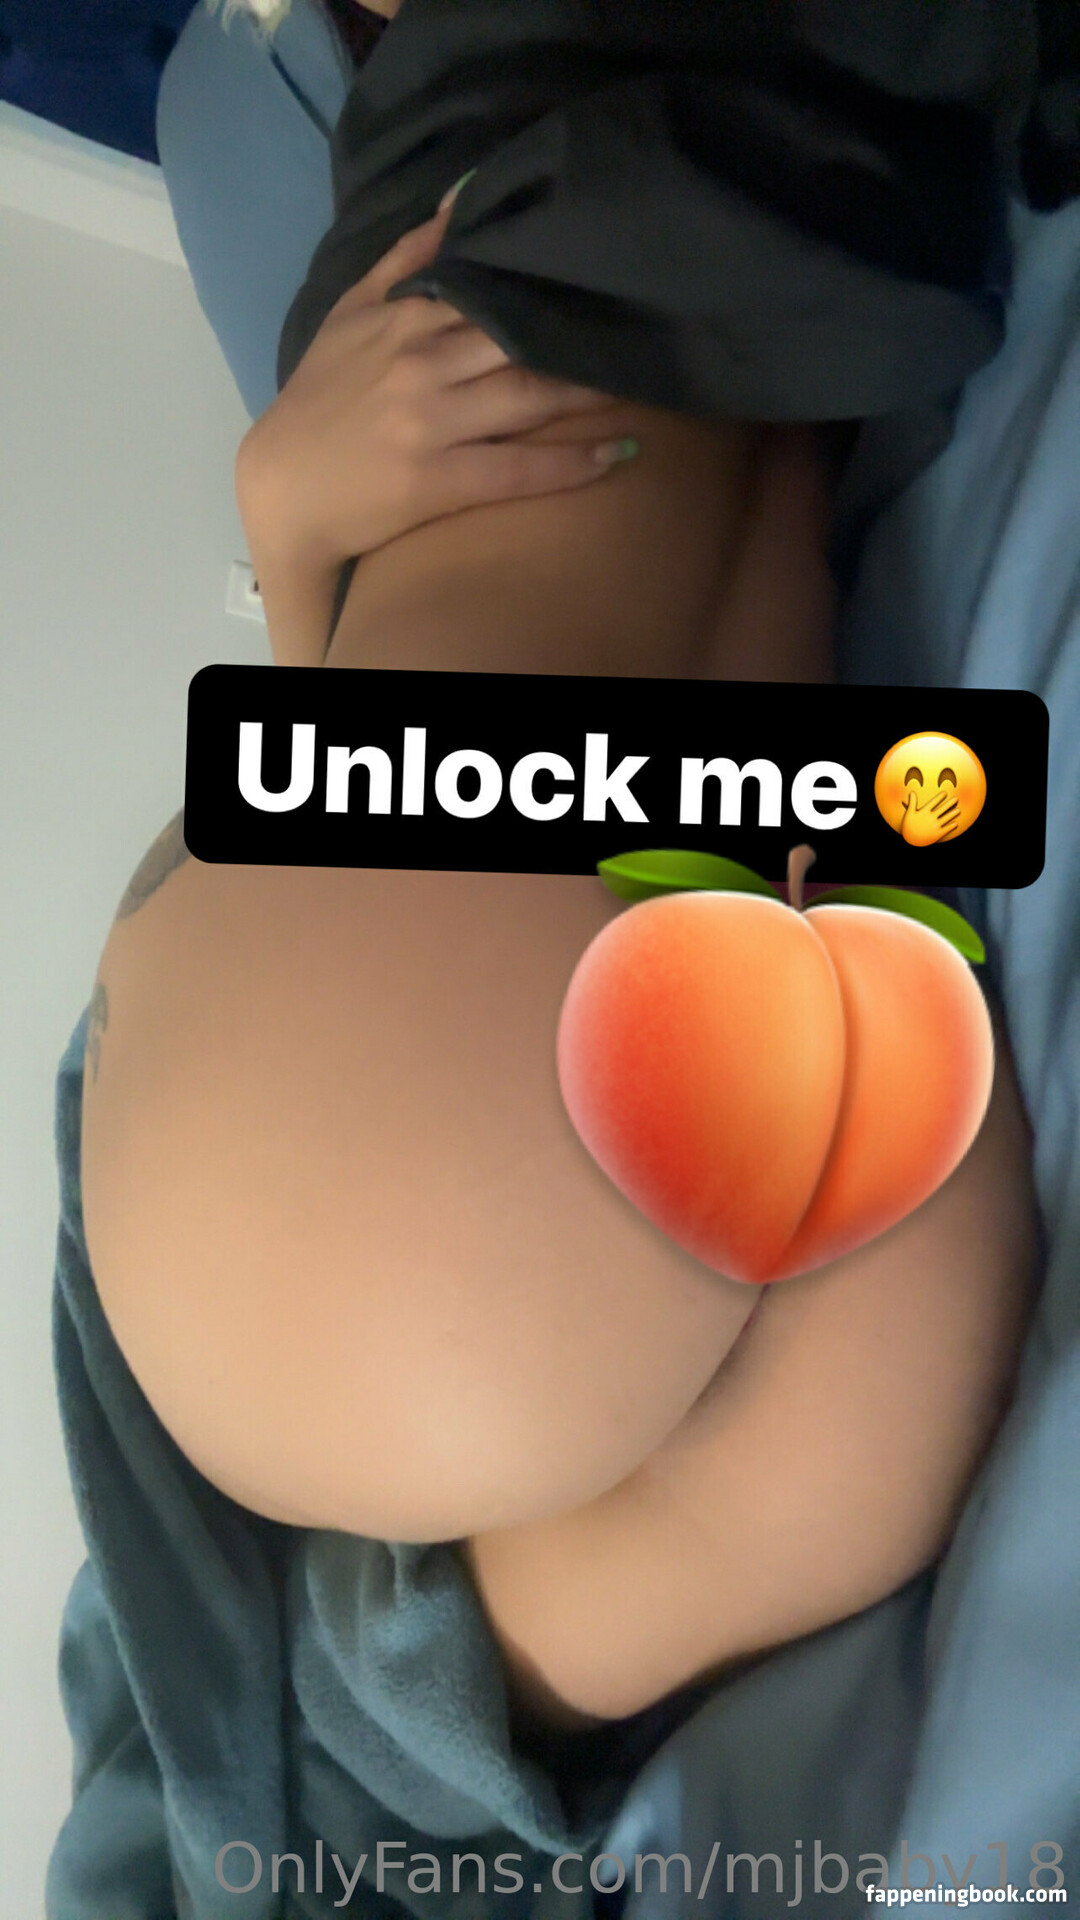 Itsmjbaby onlyfans